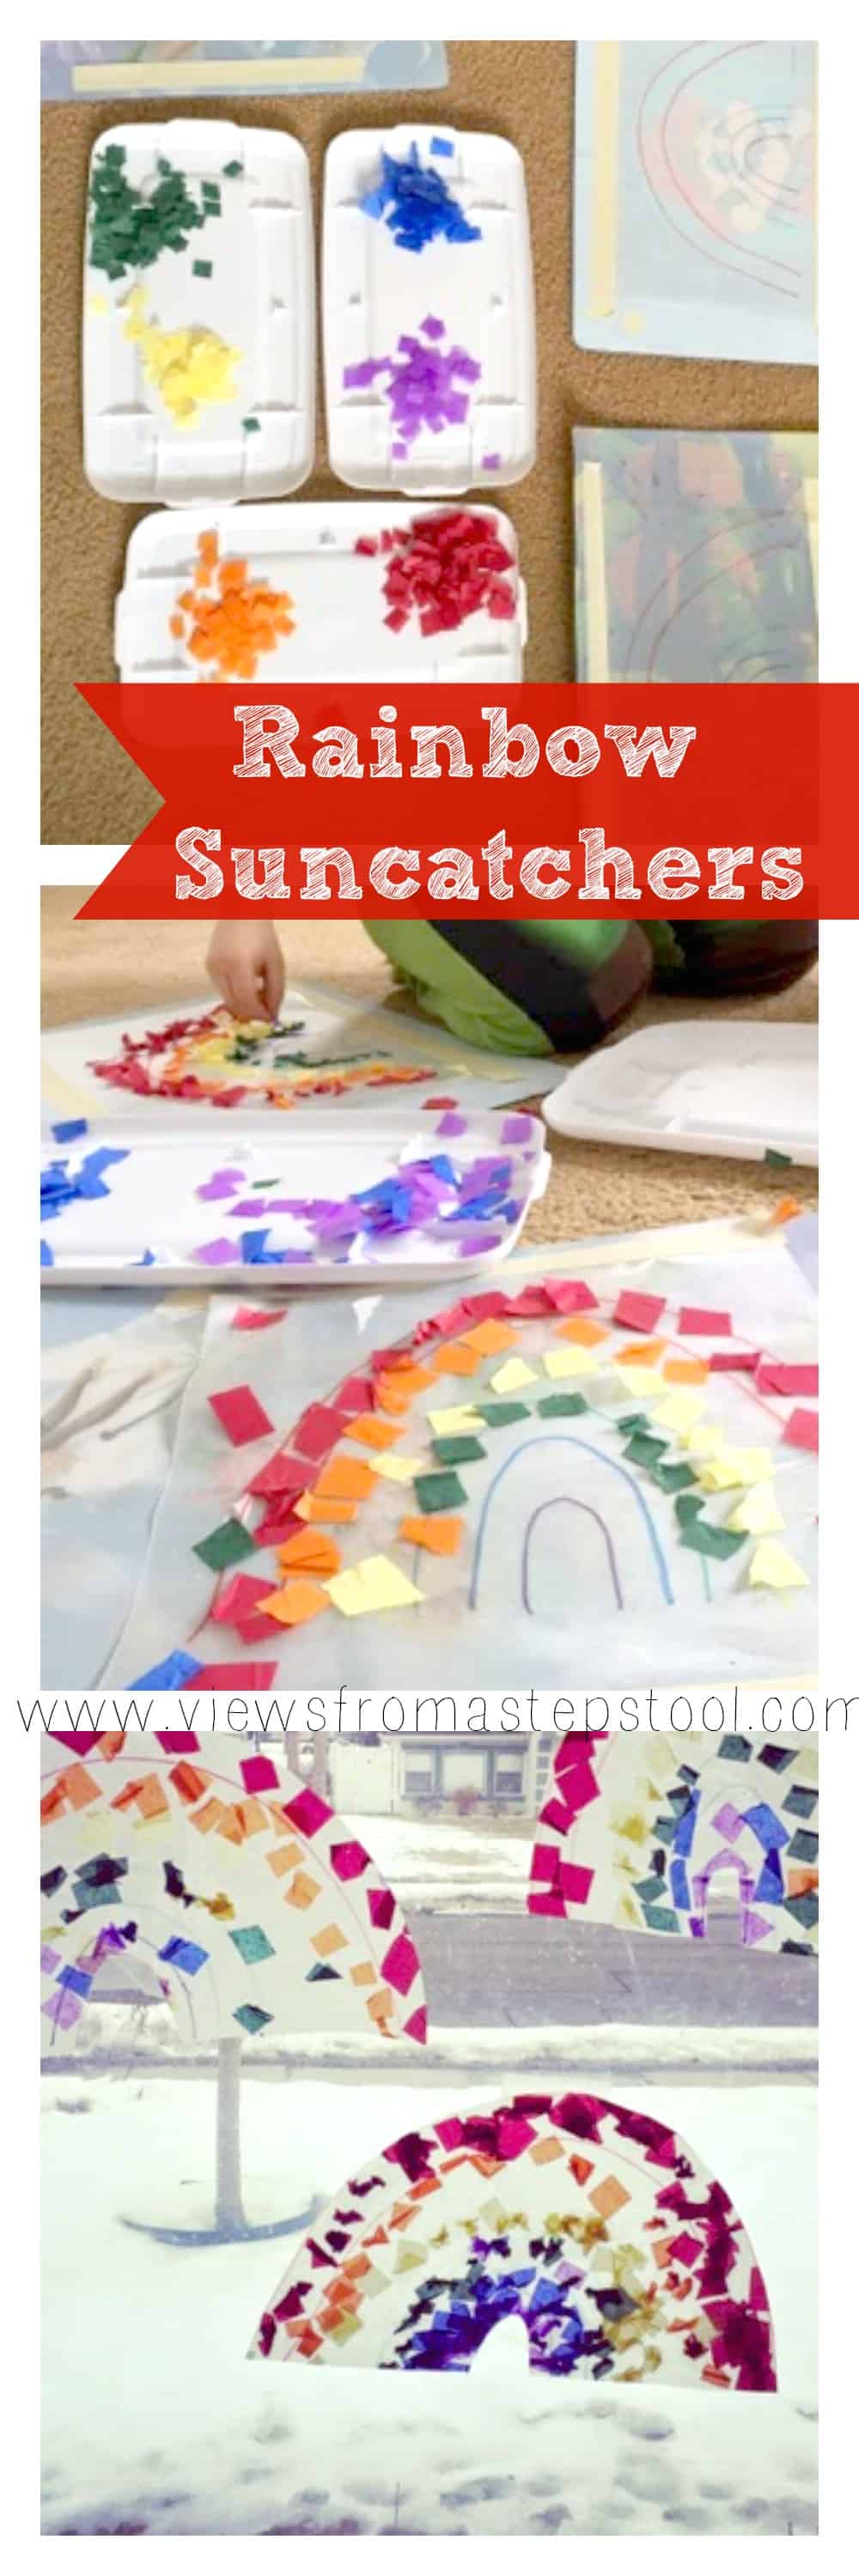 Kid-made rainbow suncatcher decorations for a variety of ages that will brighten up any window and welcome Spring!